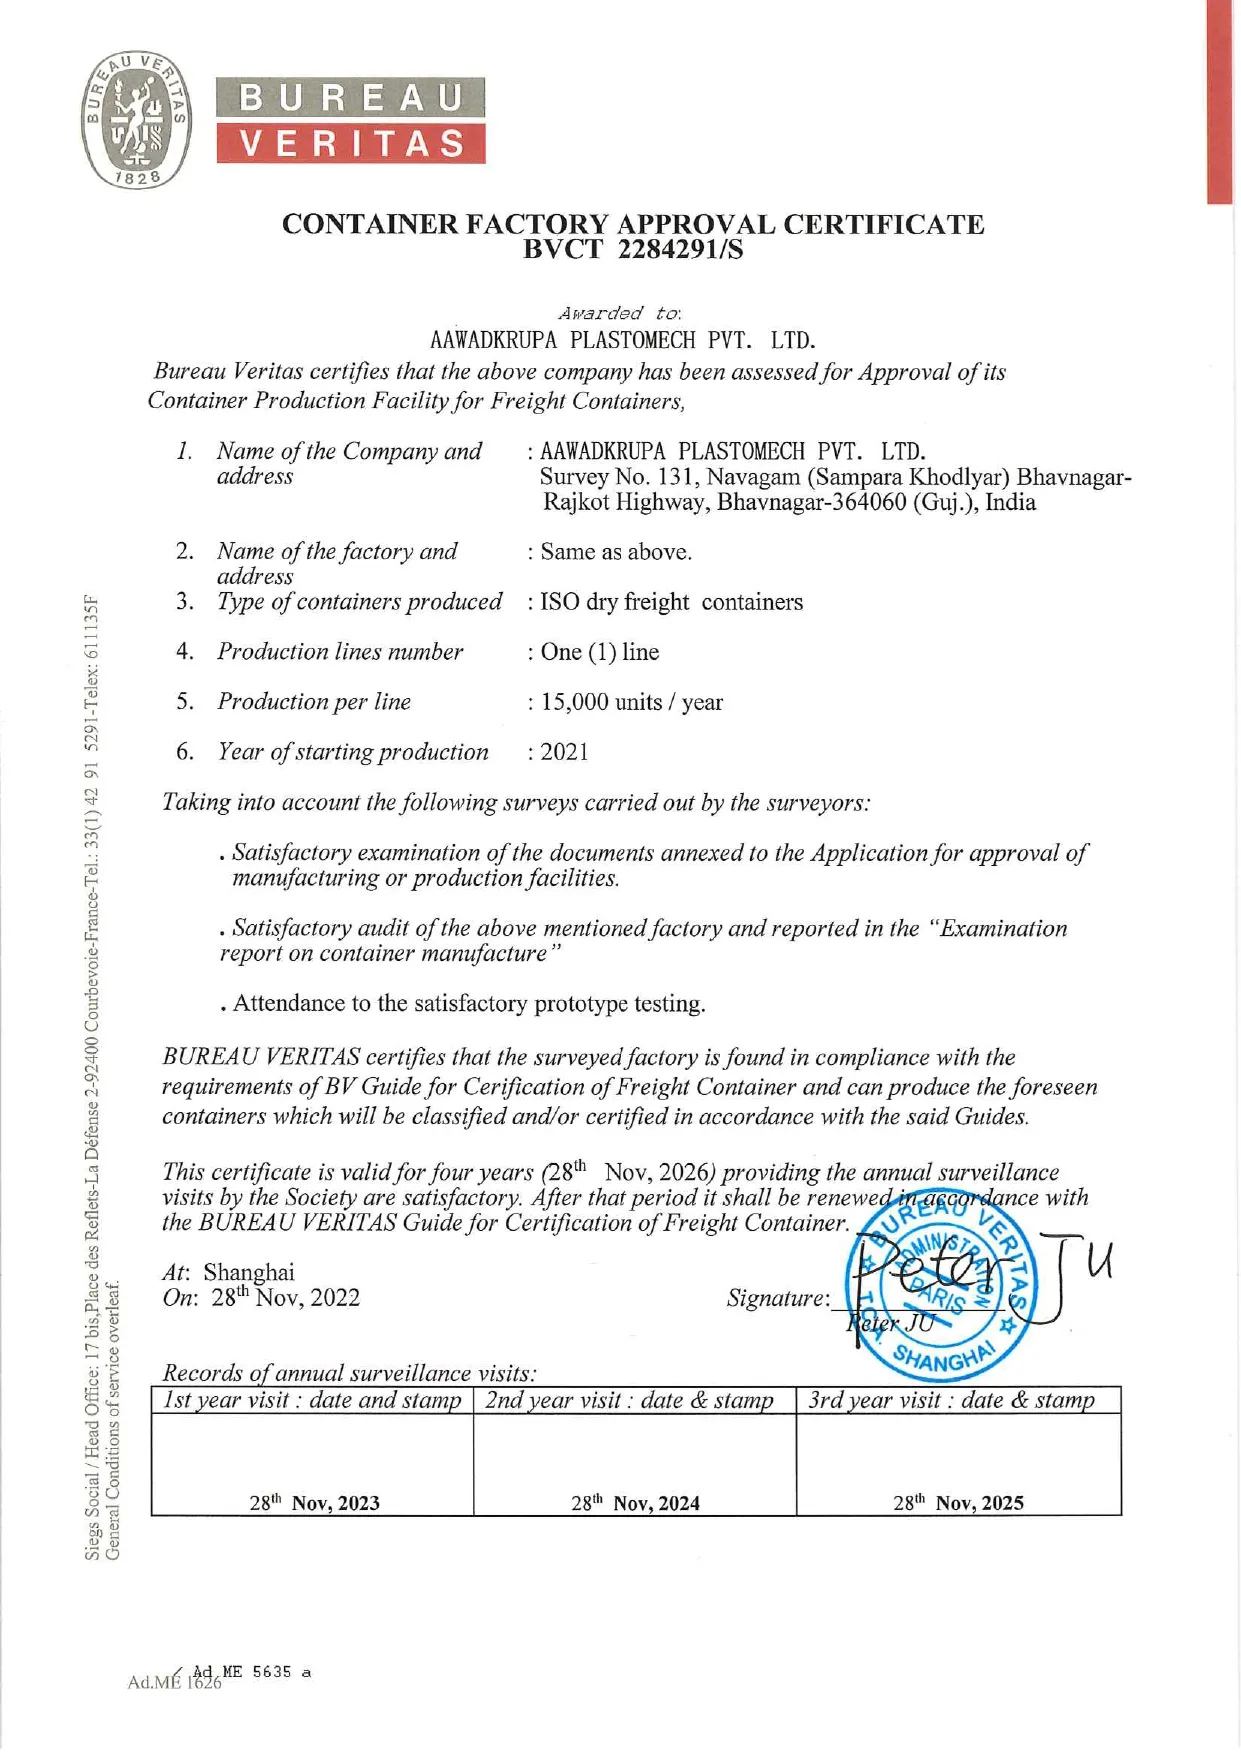 BV Certificate for factory approval